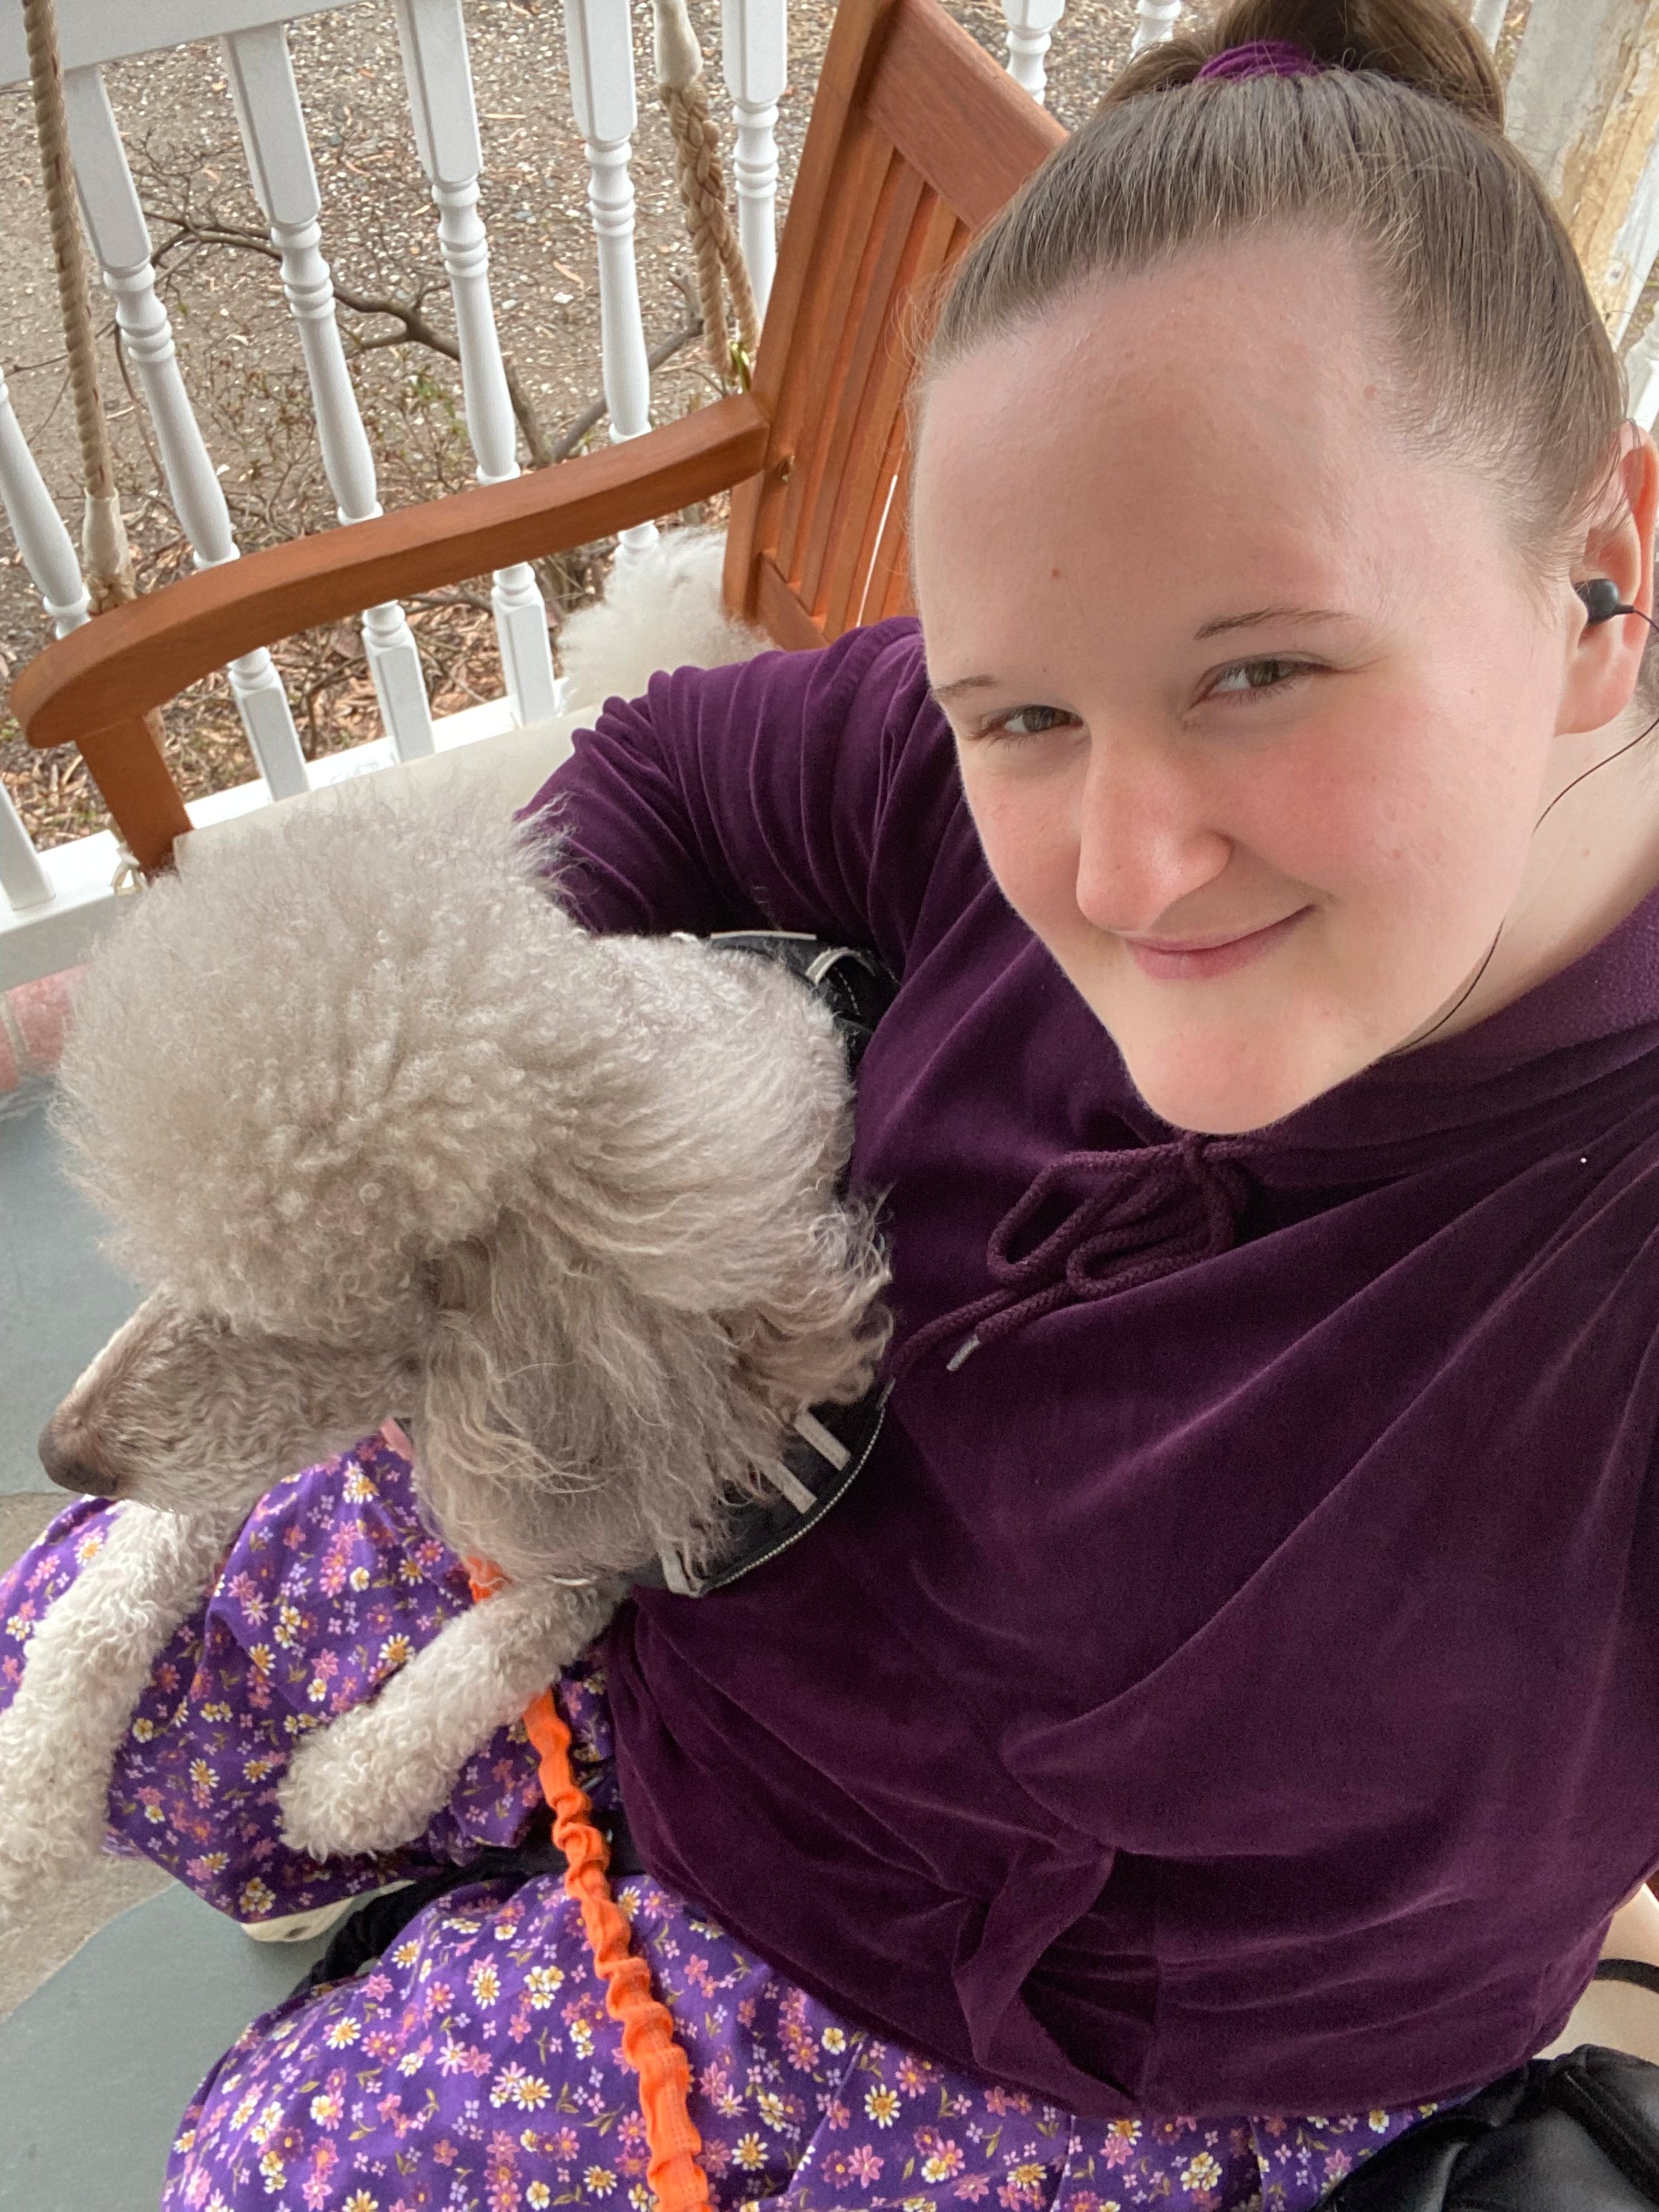 Enjoying some snuggles on the porch swing in the nice weather Thursday 💙💜